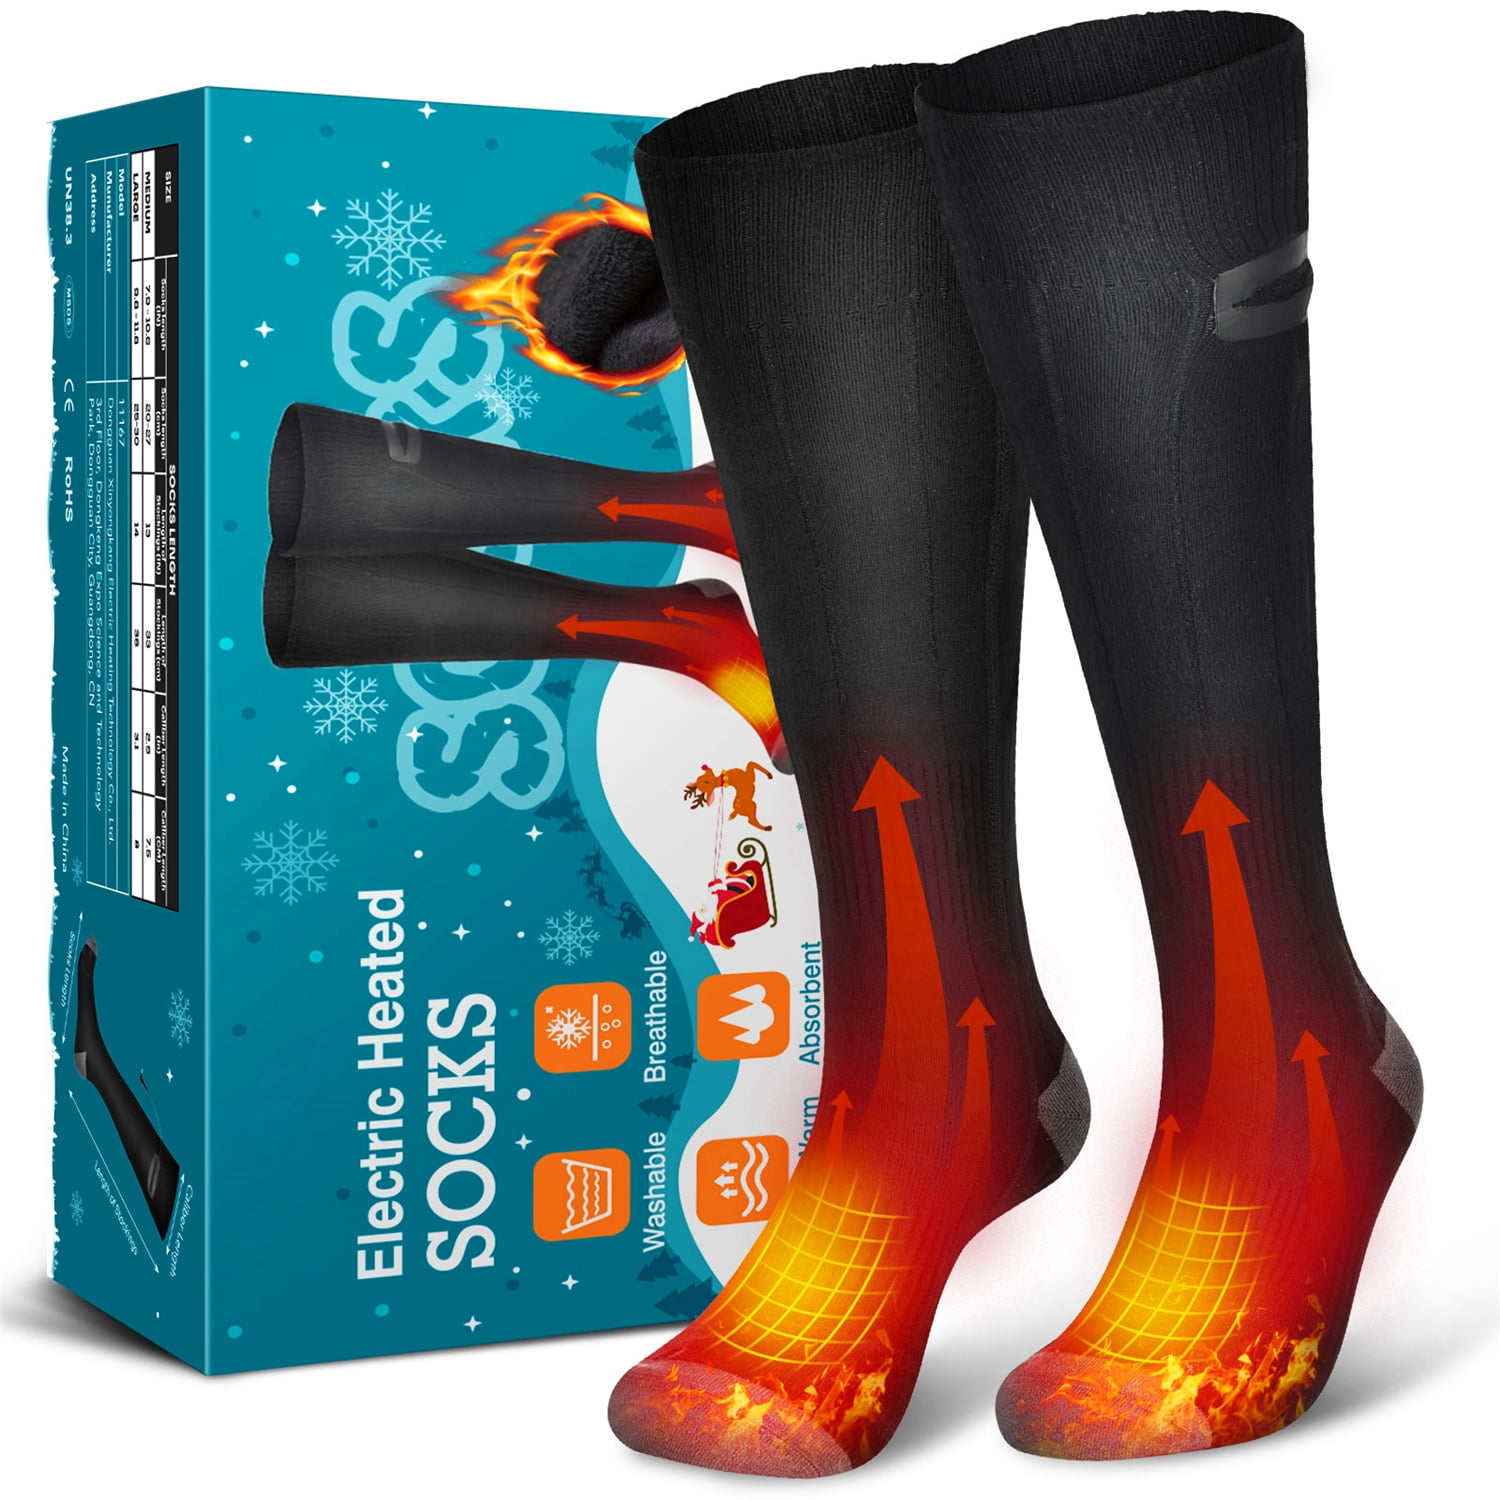 Thermo-Socks Kit Ideal for Cold Weather Winter Outdoor Sports Heated Socks,Rechargeable Electric Heating Socks Foot Warm Equipment Mens Socks & Womens Socks